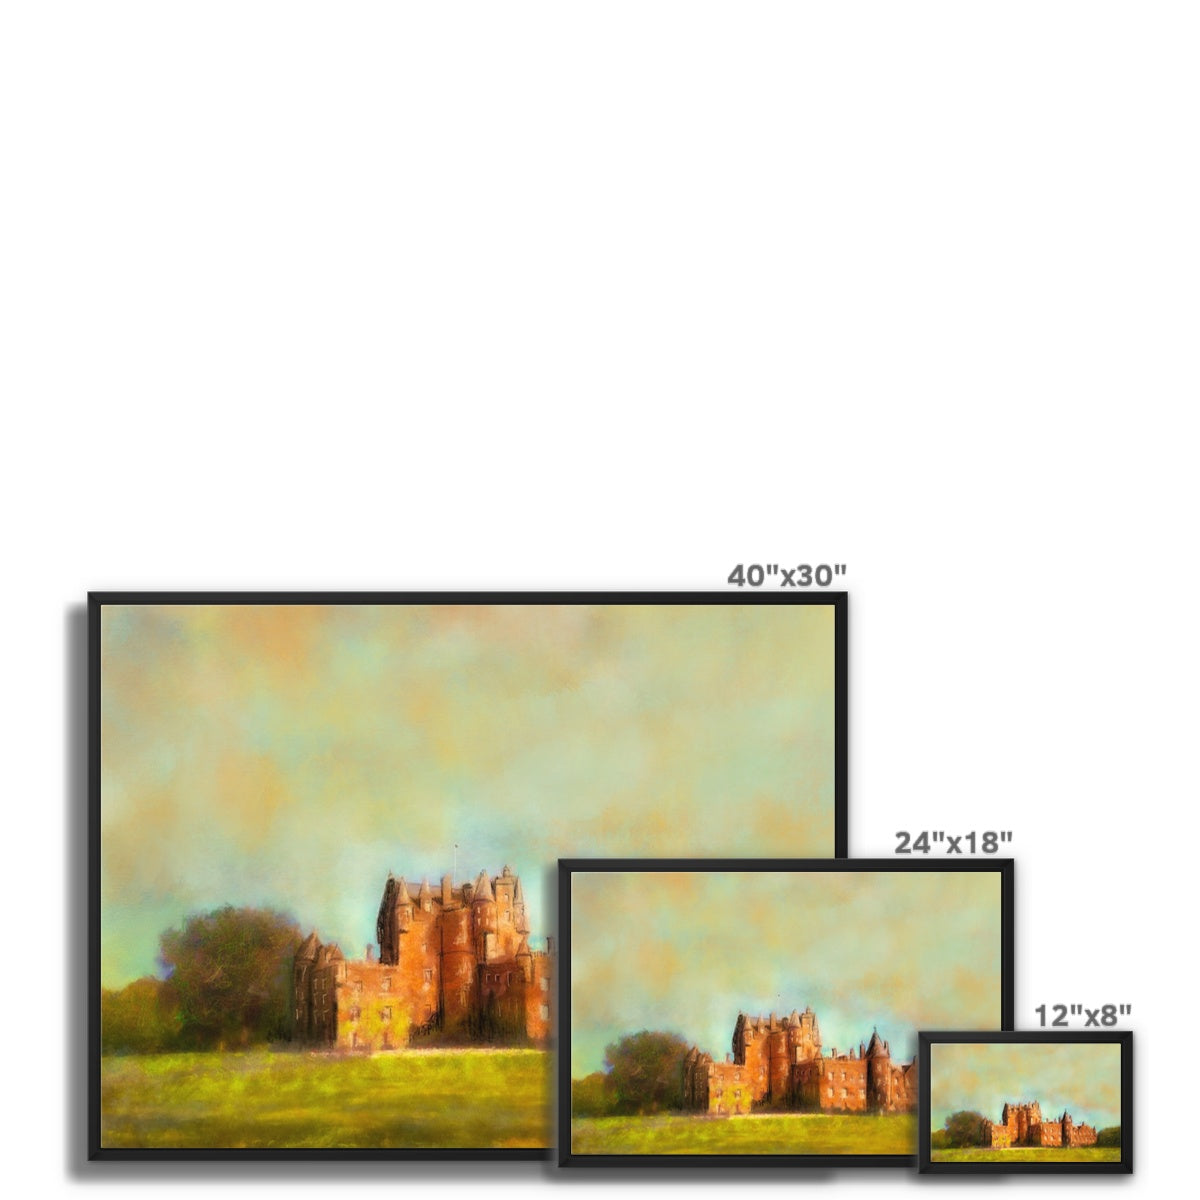 Glamis Castle Painting | Framed Canvas From Scotland-Floating Framed Canvas Prints-Historic & Iconic Scotland Art Gallery-Paintings, Prints, Homeware, Art Gifts From Scotland By Scottish Artist Kevin Hunter